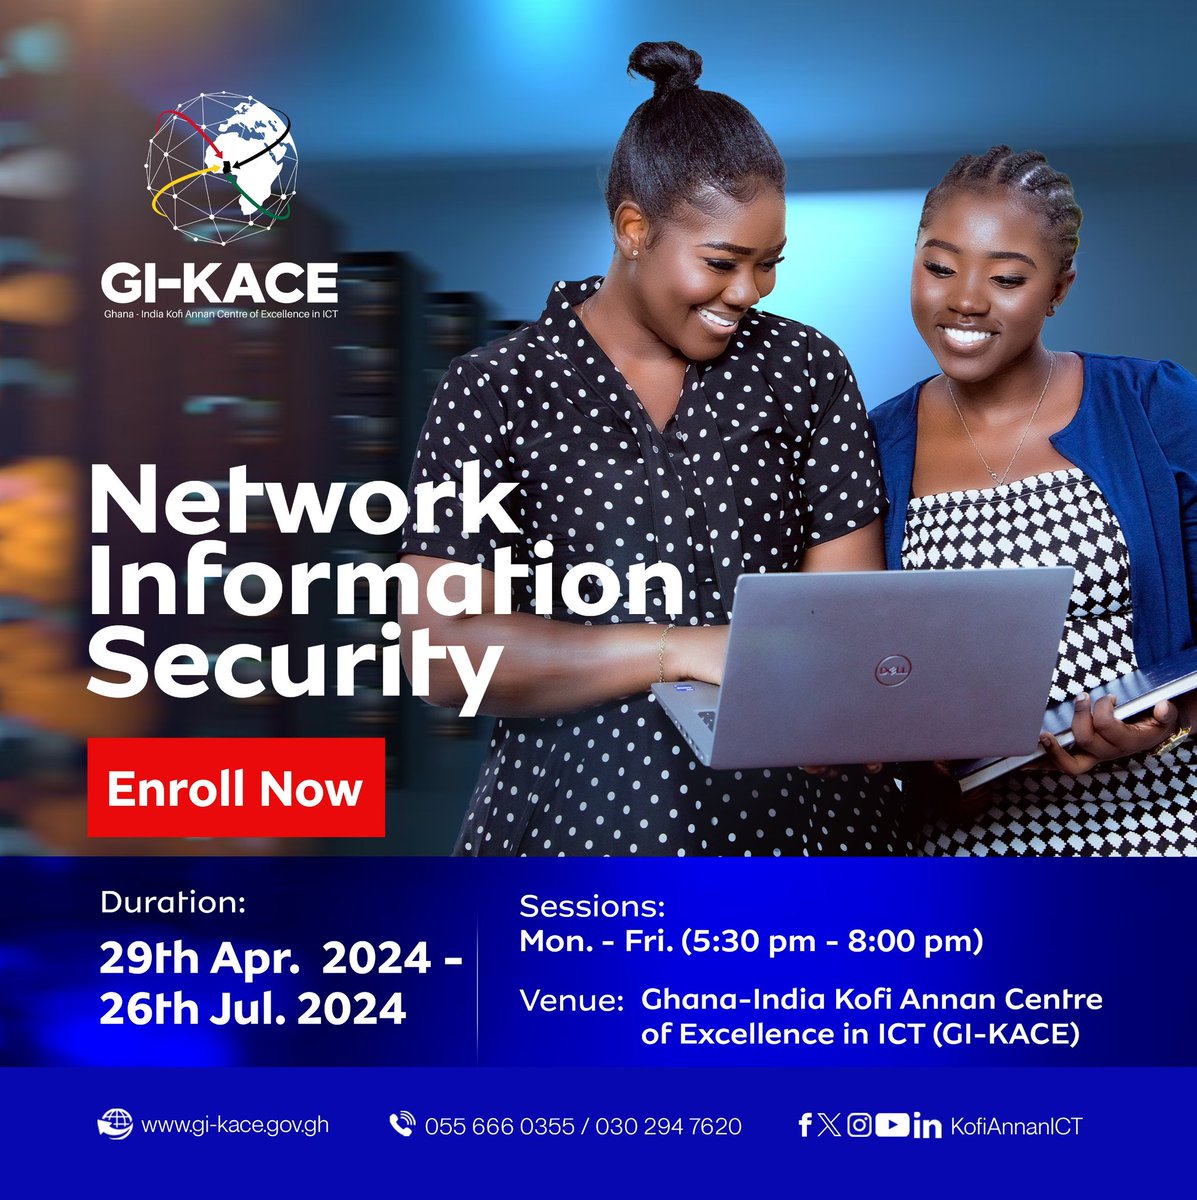 Do you want to equip yourself with the up-to-date and necessary skills and techniques needed to safeguard your network and data from breaches or threats? 

Call 0556660555 to register for this intensive Network Information Security (NIS) course now!
#GIKACE #KofiAnnanICT